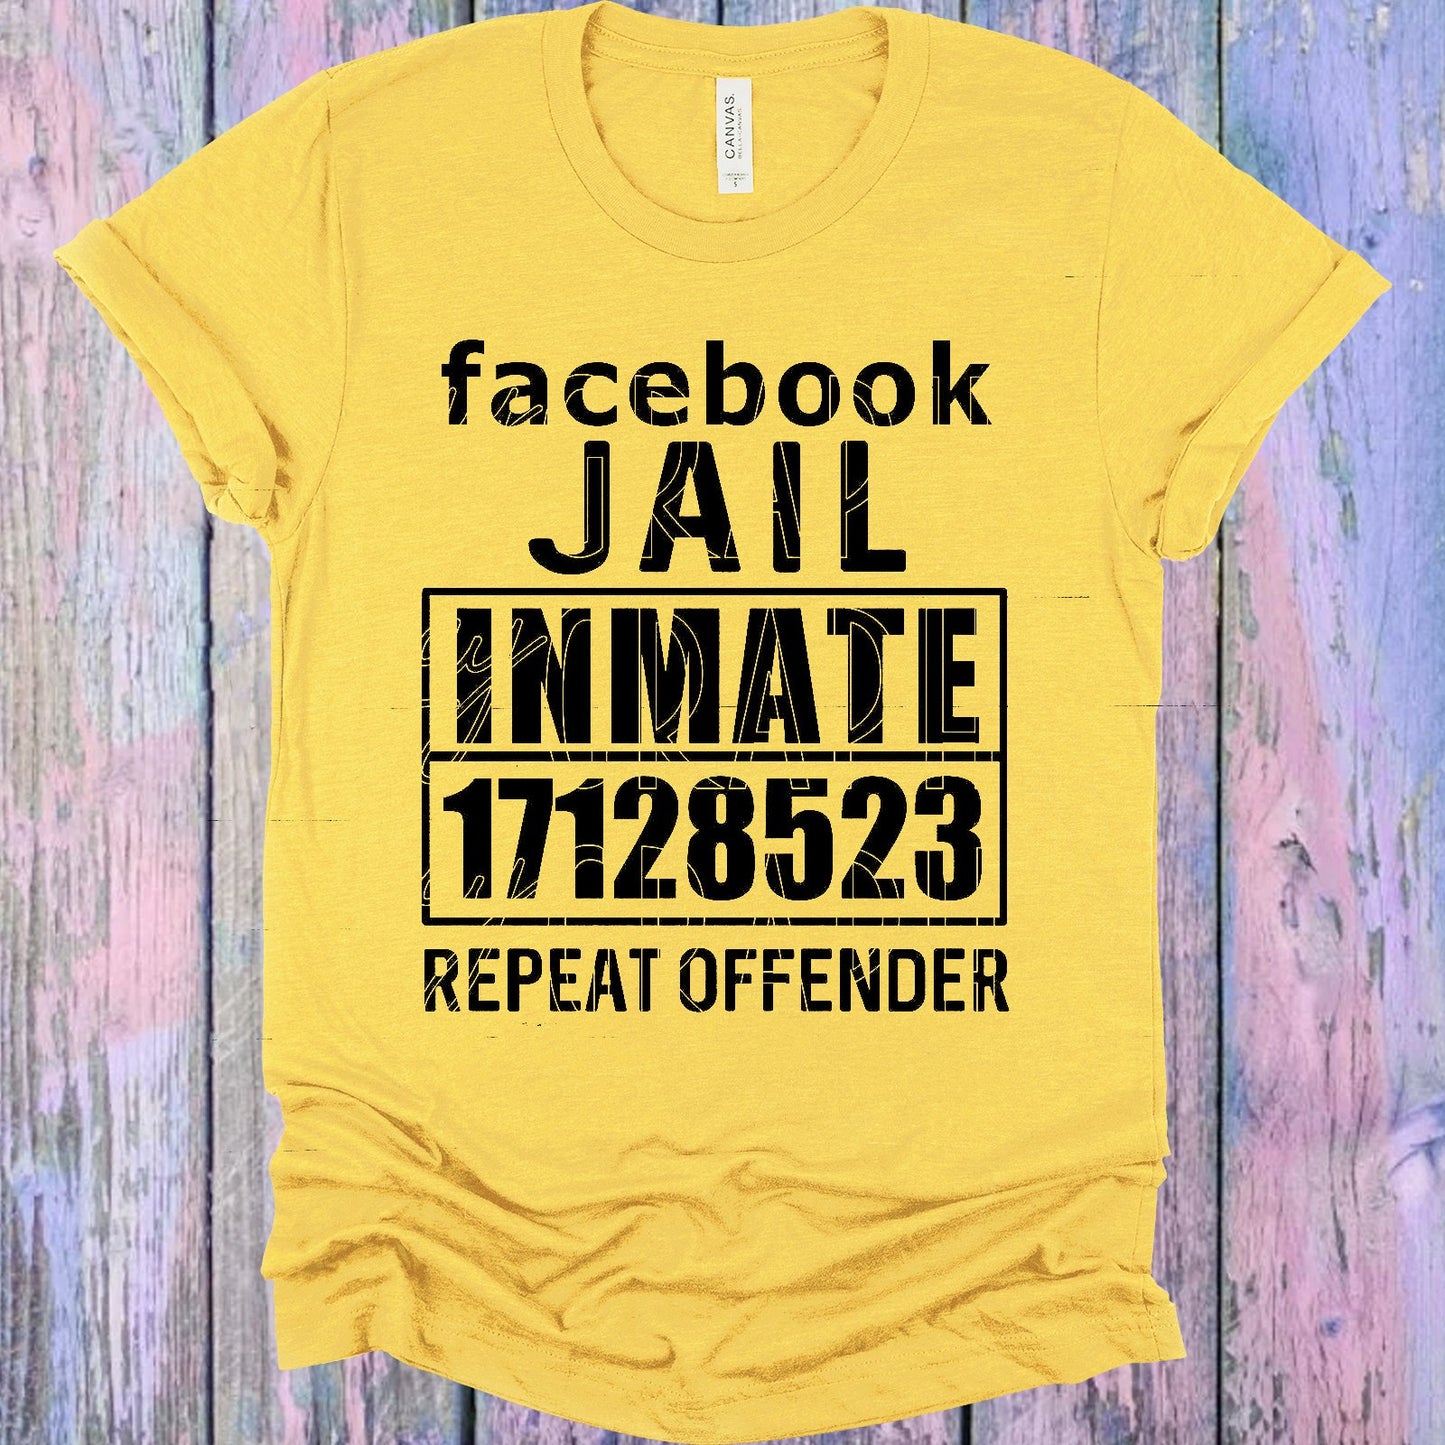 Facebook Jail Graphic Tee Graphic Tee